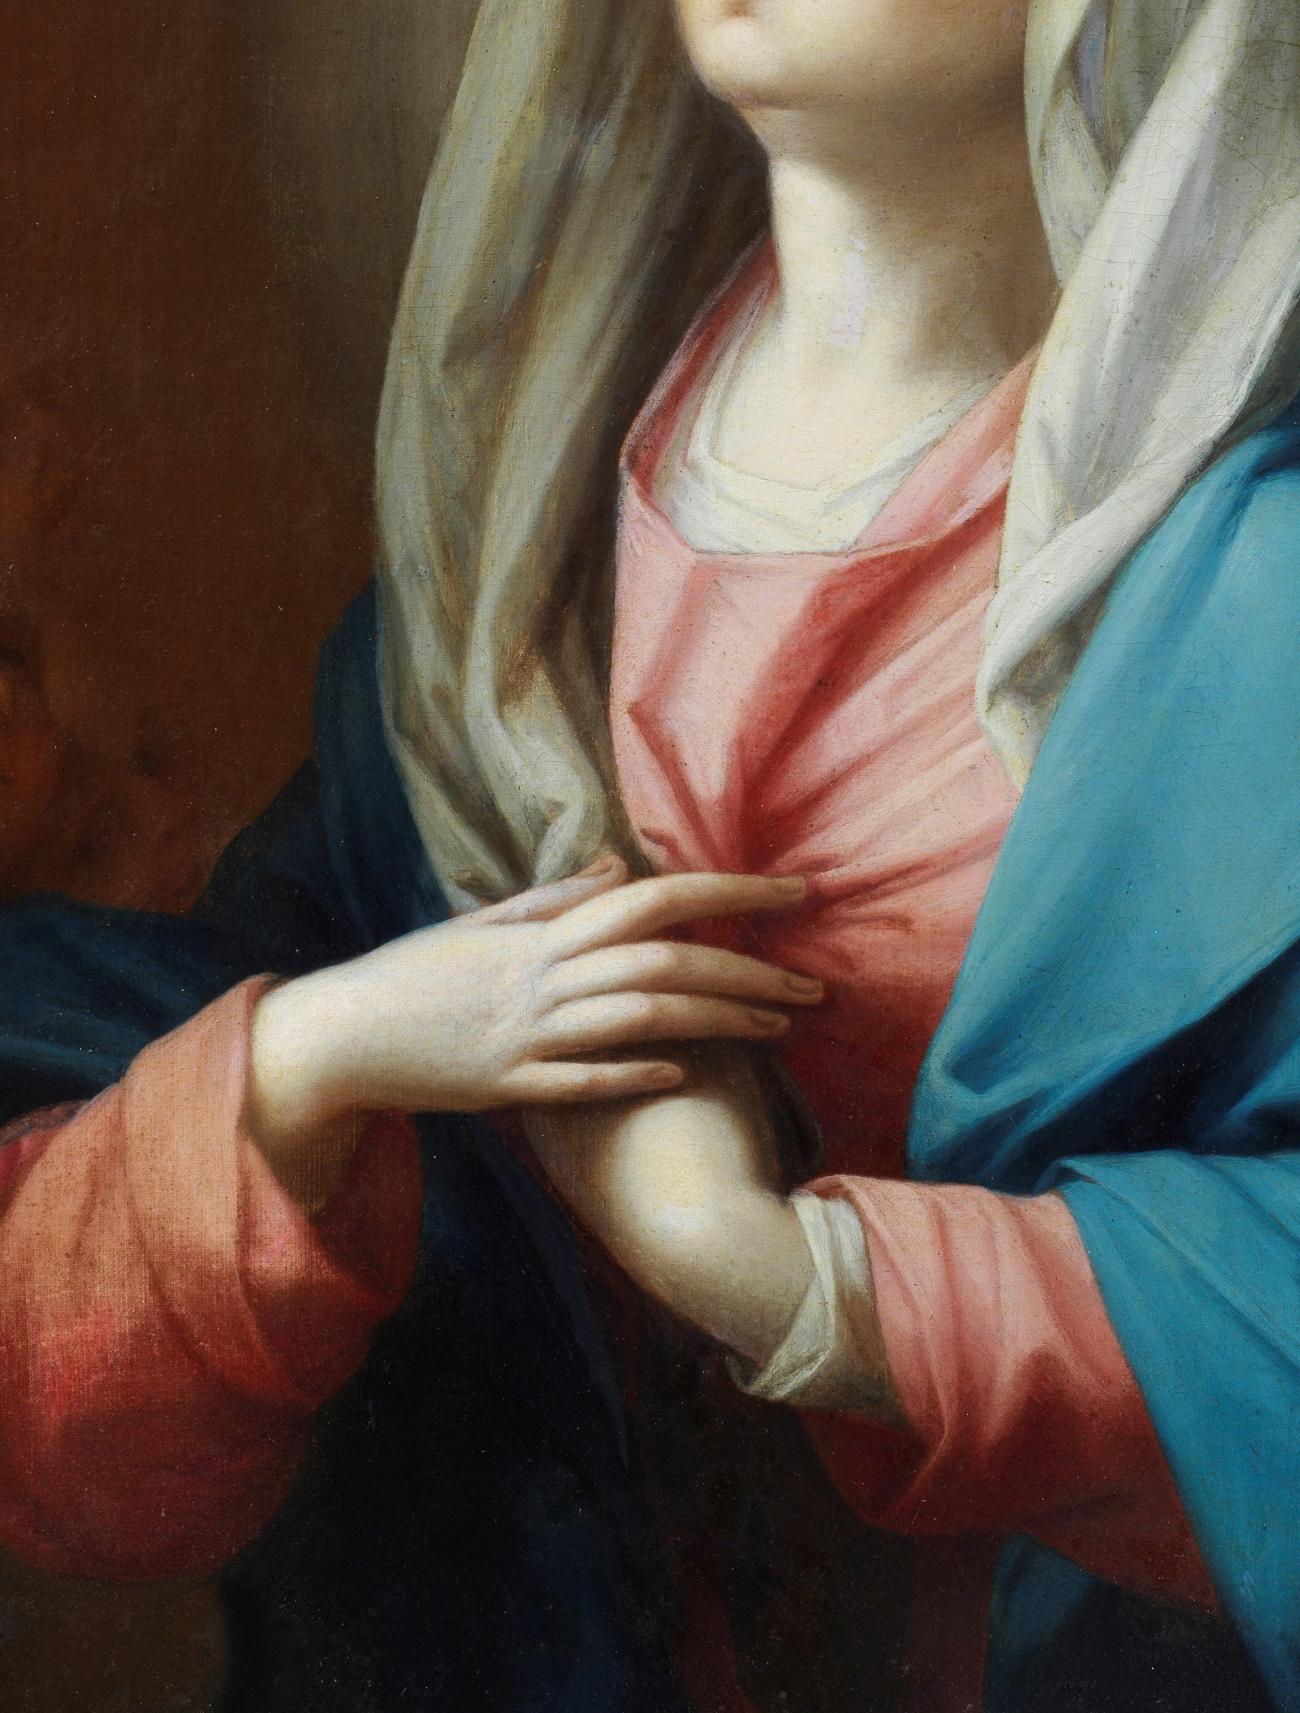 Praying Madonna with her face turned towards the sky and little angels.

Oil on canvas, 99x75 cm without frame and 134 x 110 cm with frame by the painter Benedetto Luti (Florence 1666 - Rome 1720)

State of conservation: excellent

Luti was born in